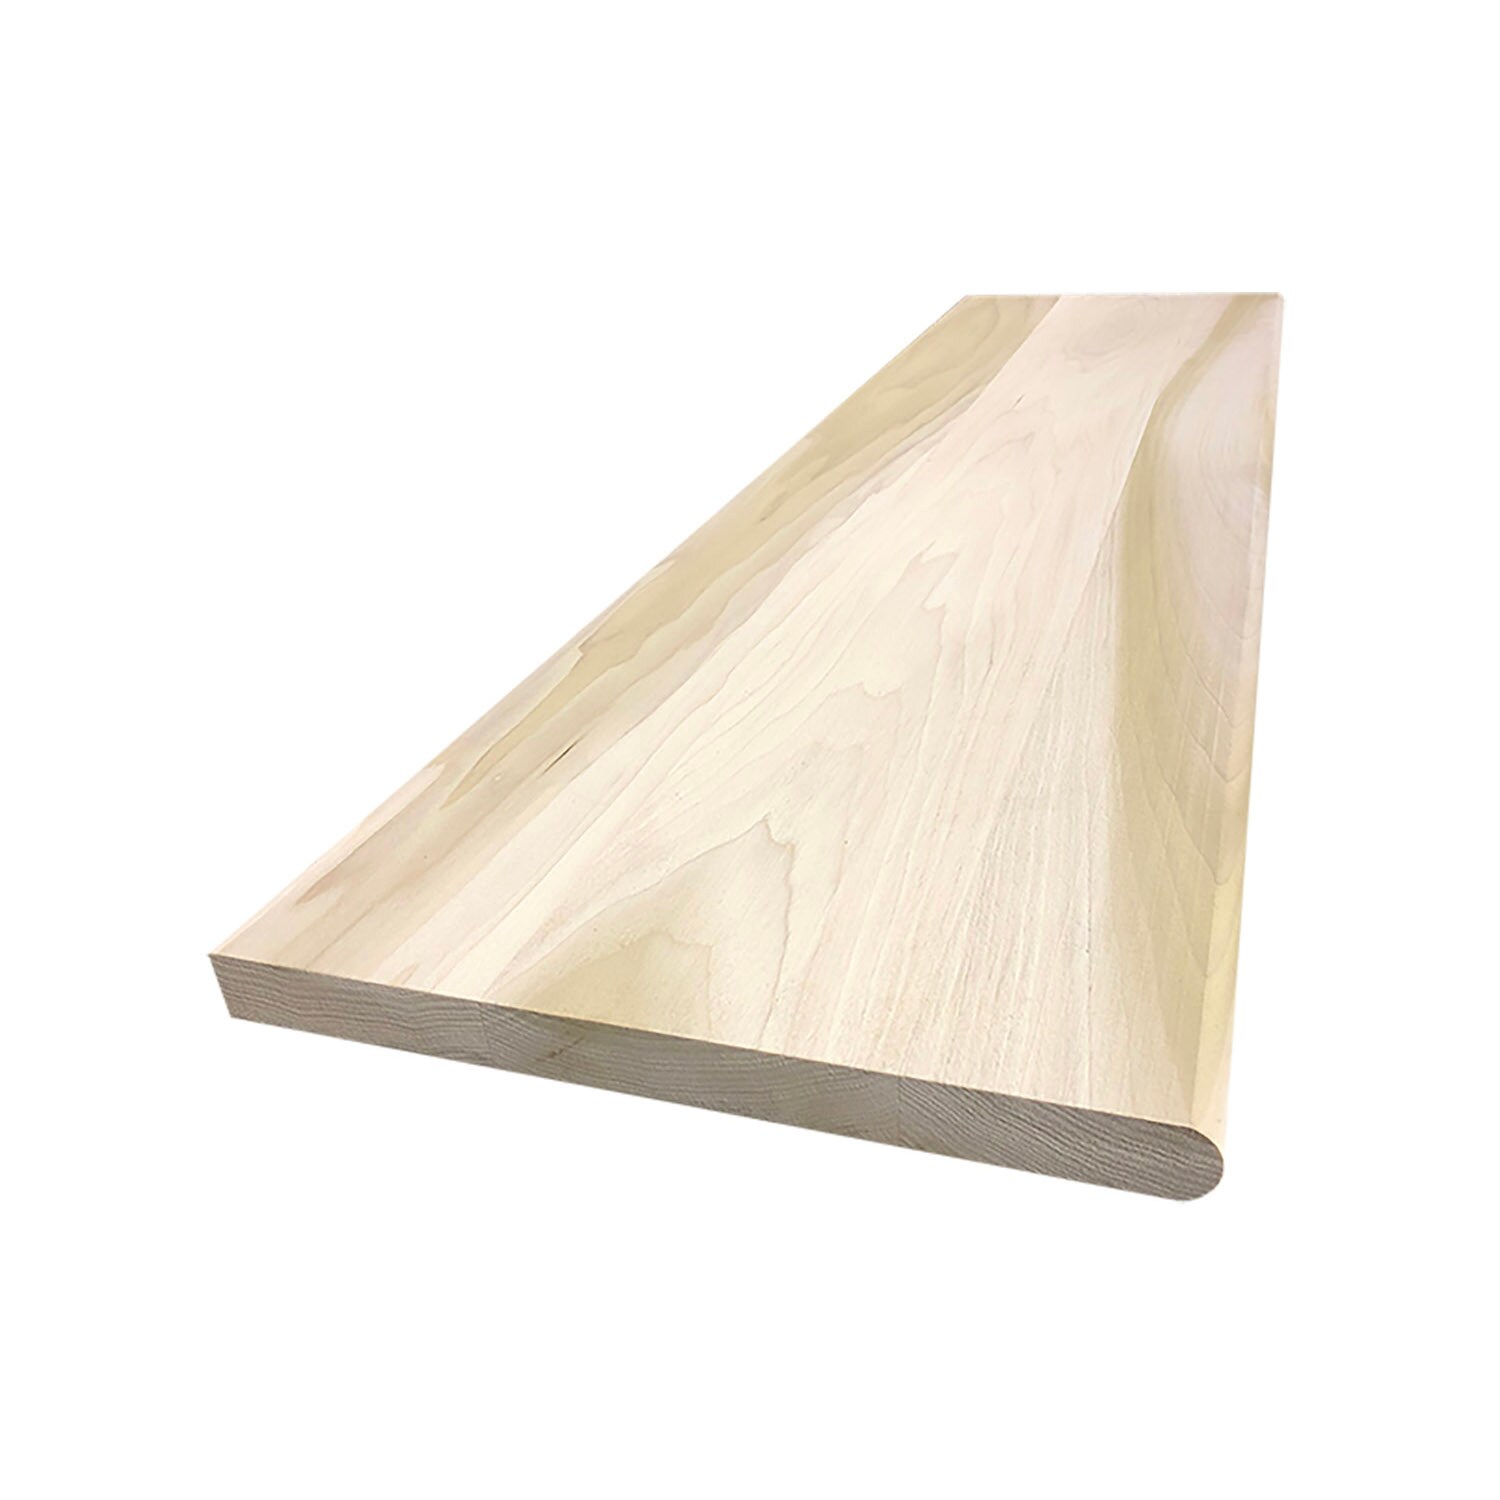 Factory Wholesale Cheapest Poplar Timber / Natural Wood Solid